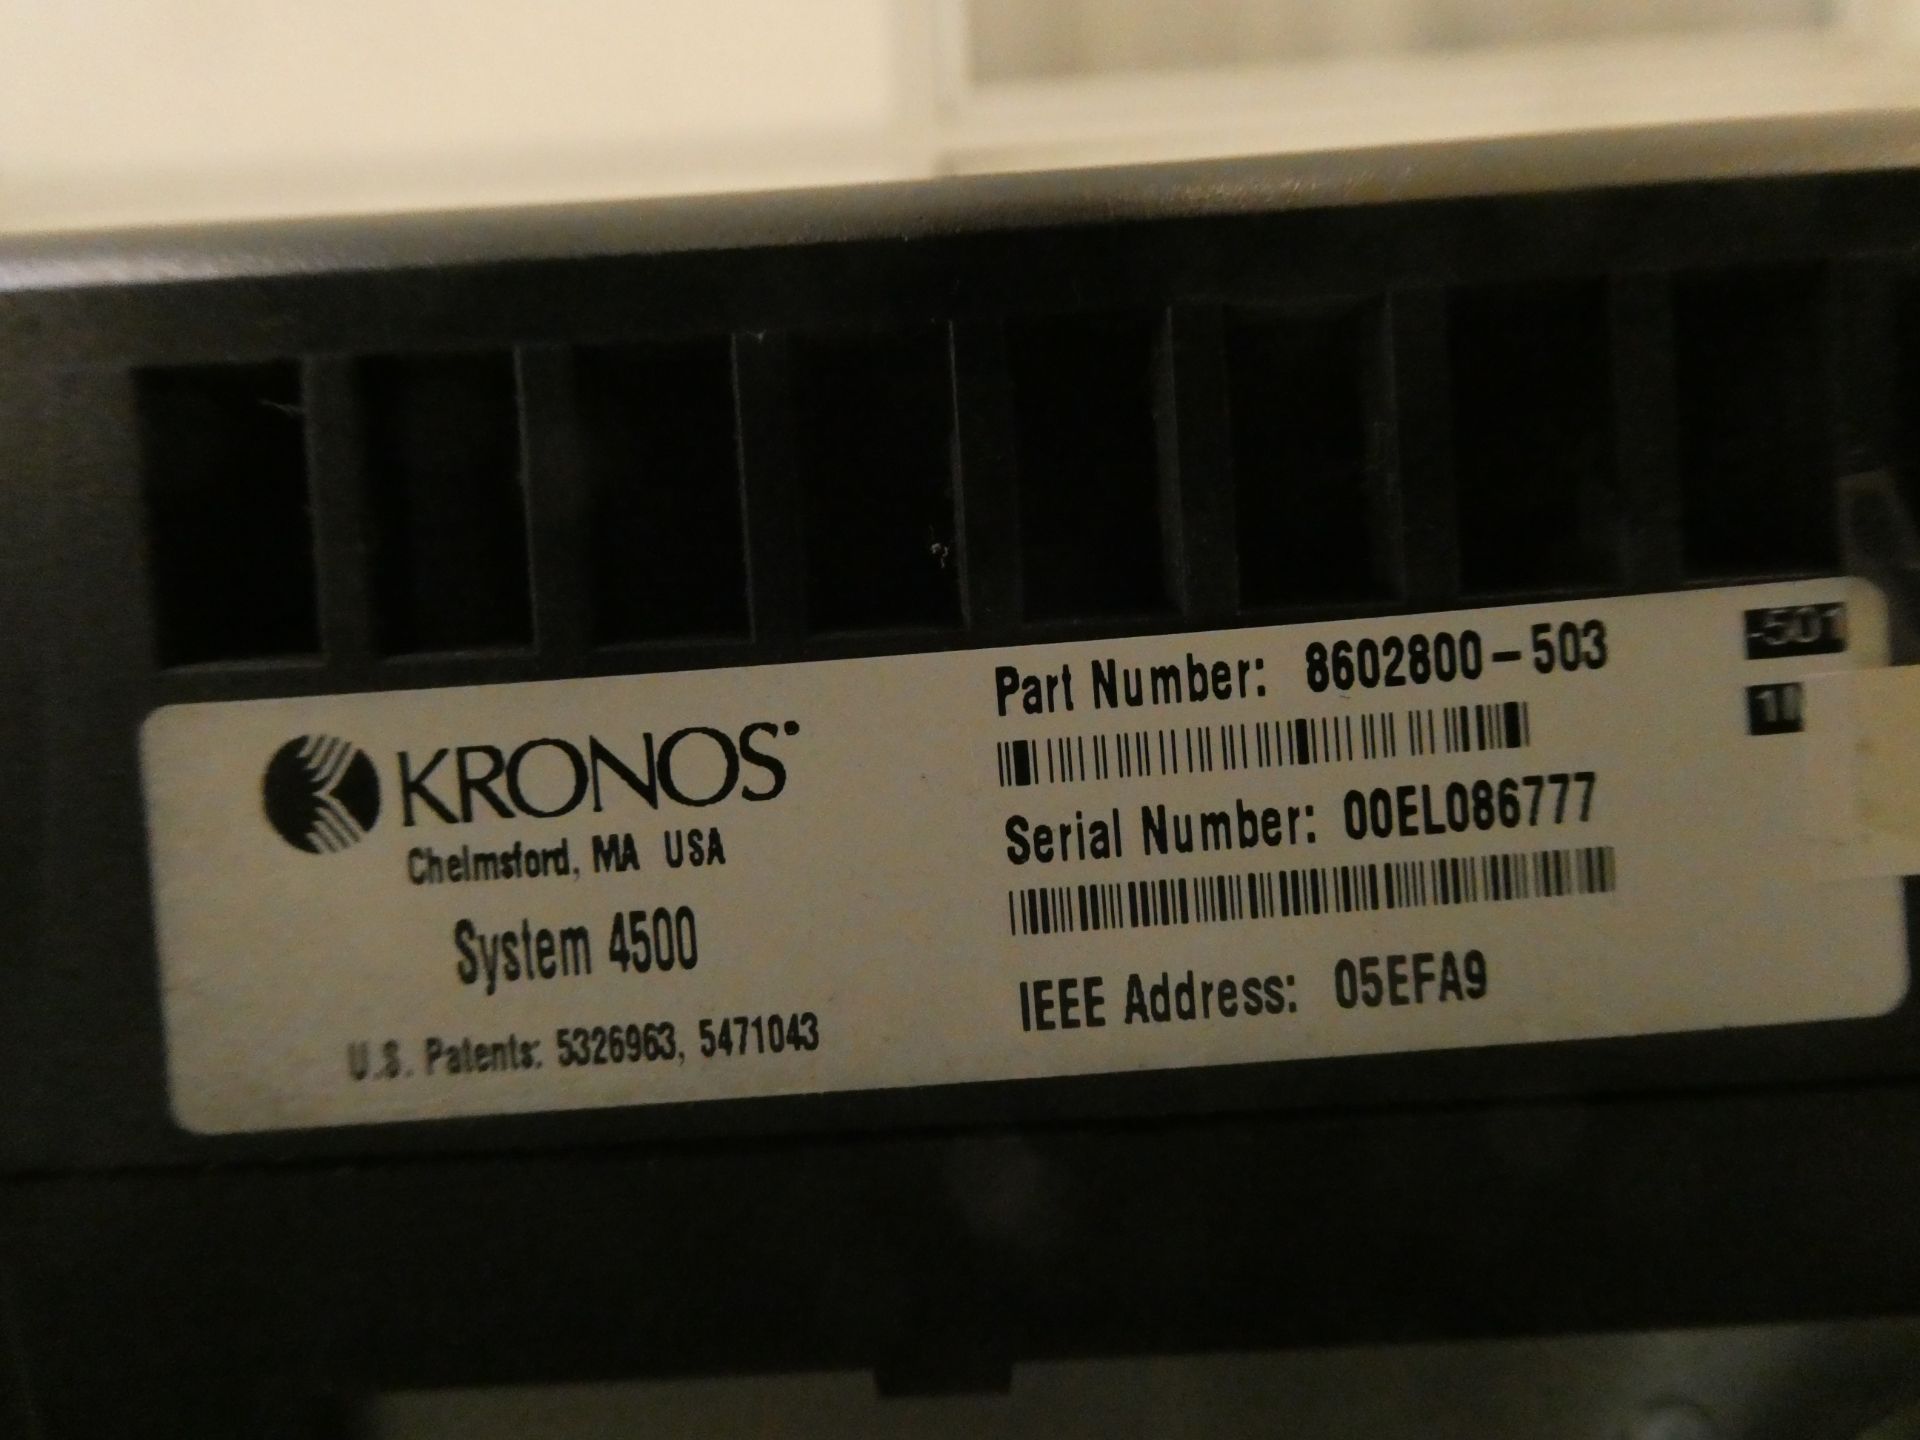 Kronos Electronic Punch Card System 4500 - Image 2 of 2